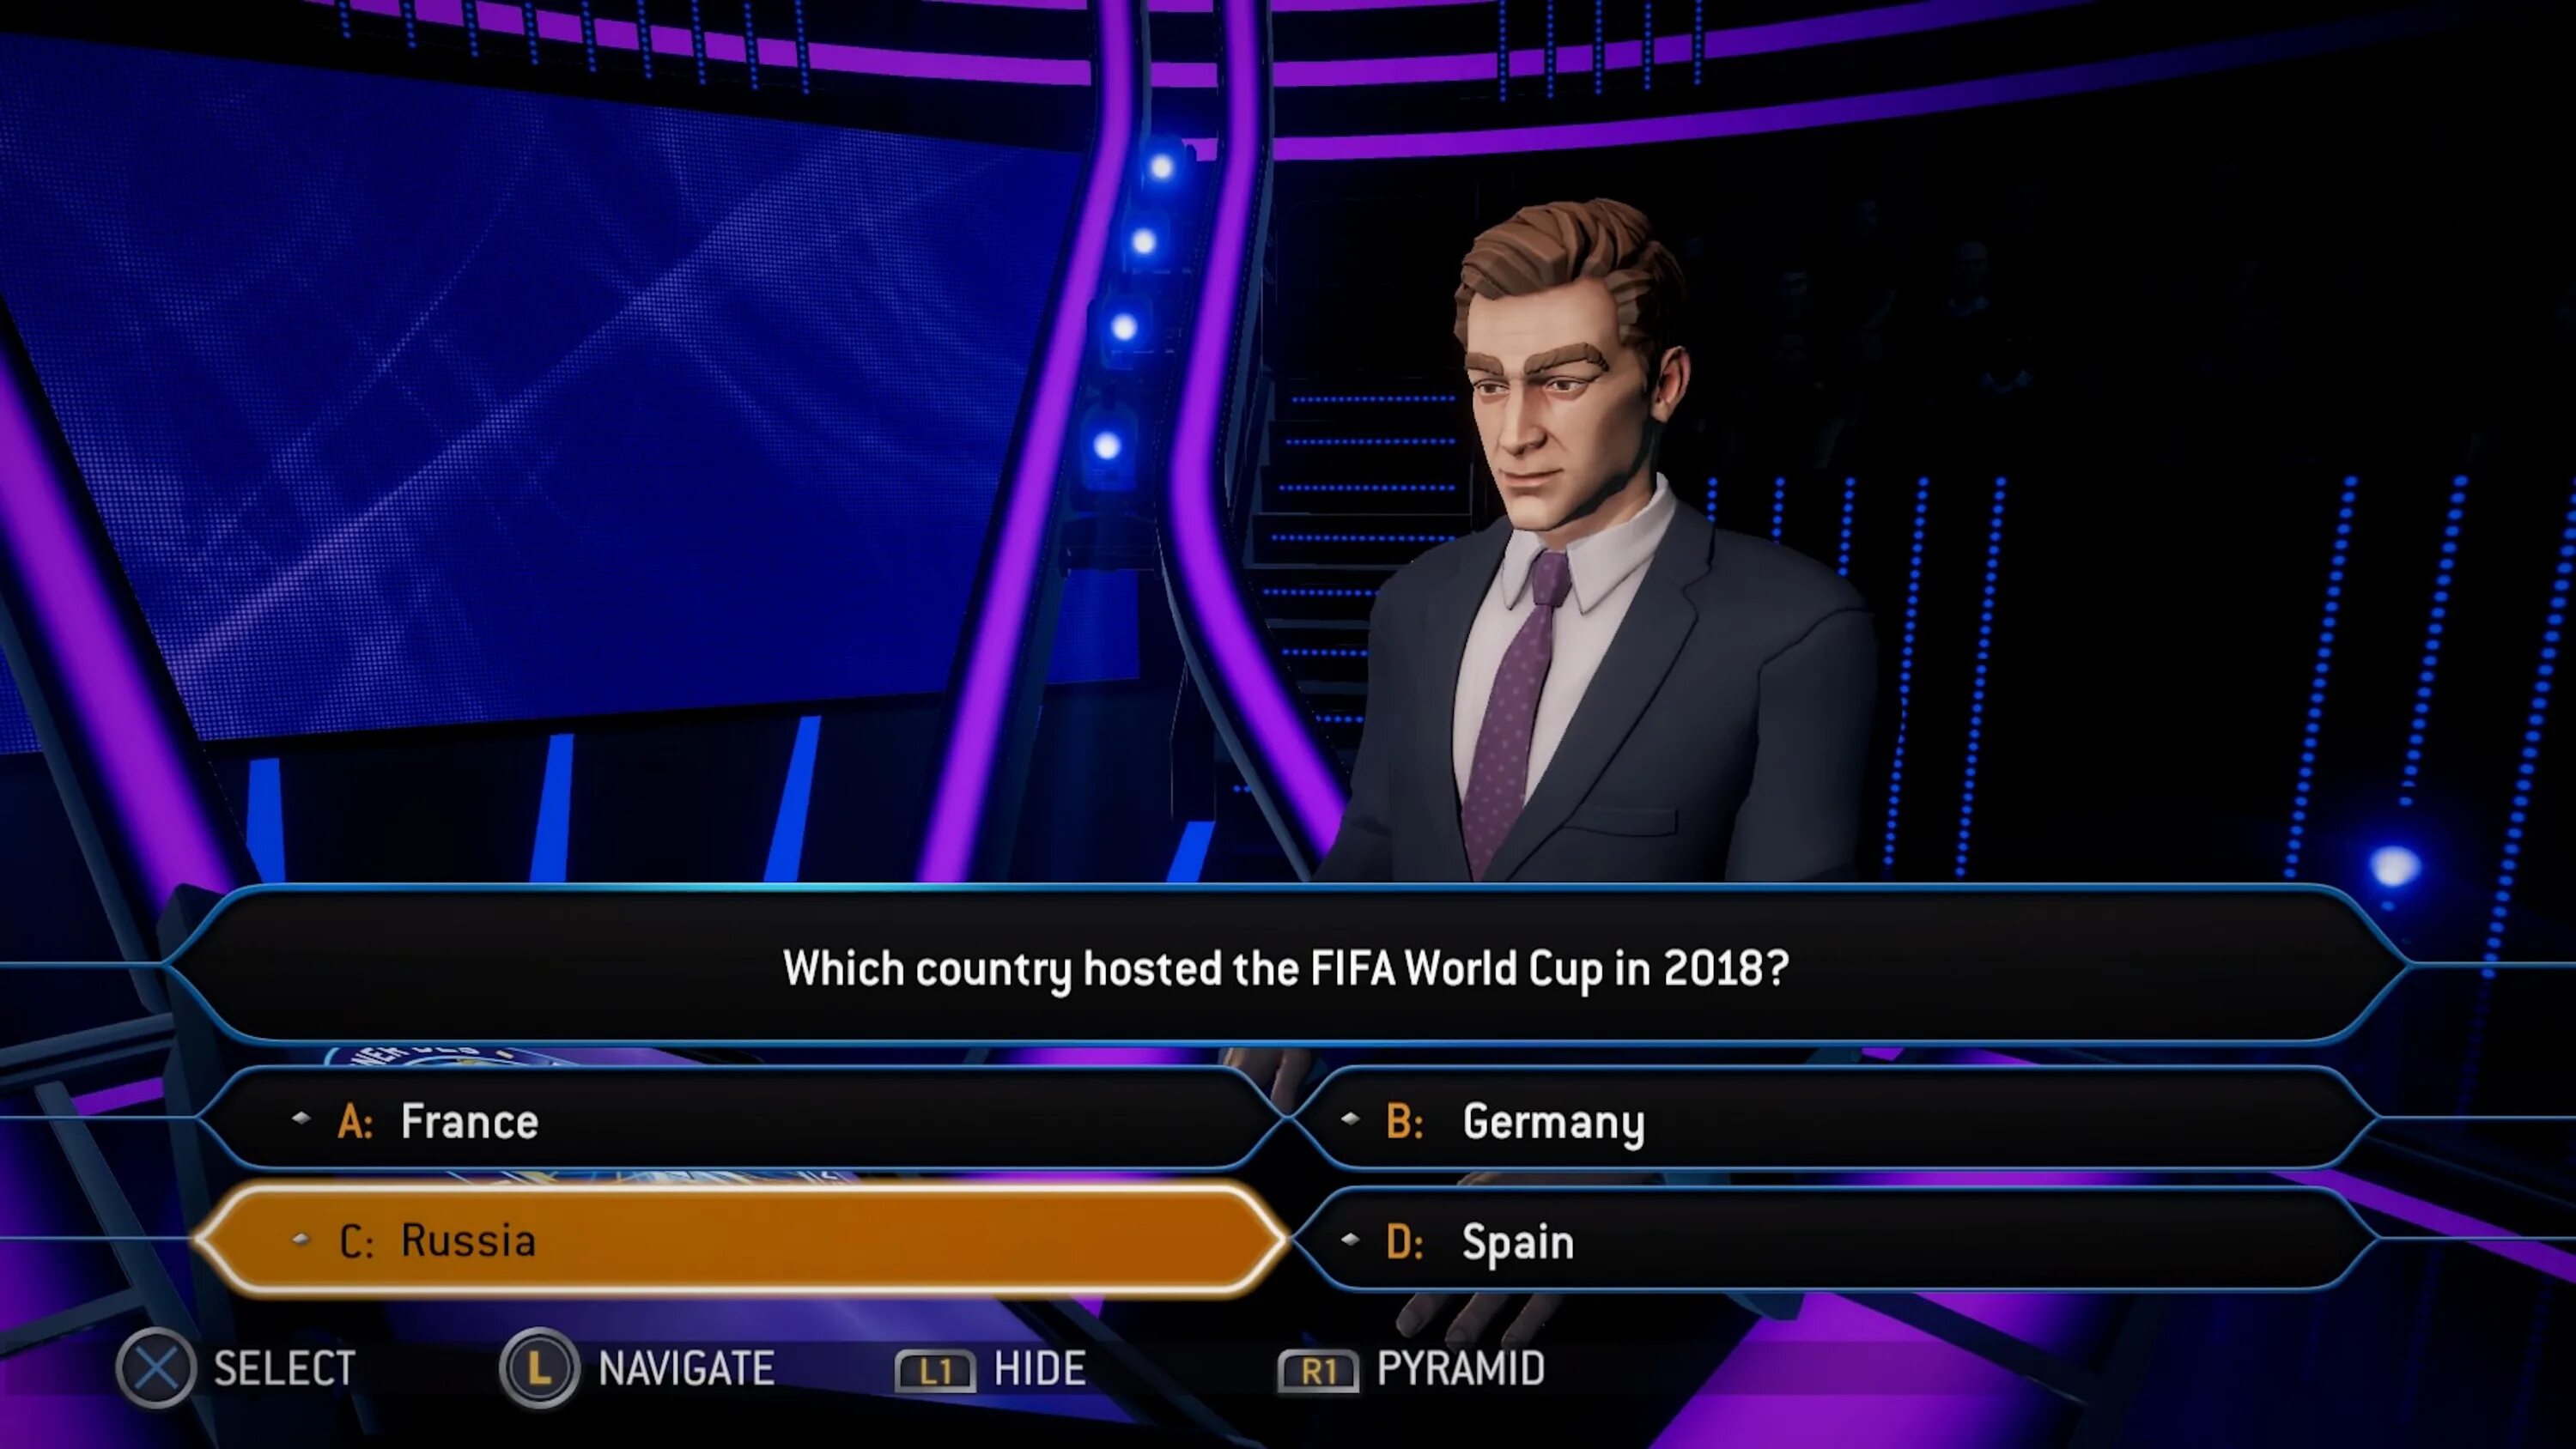 Who wants to be a Millionaire ведущий.